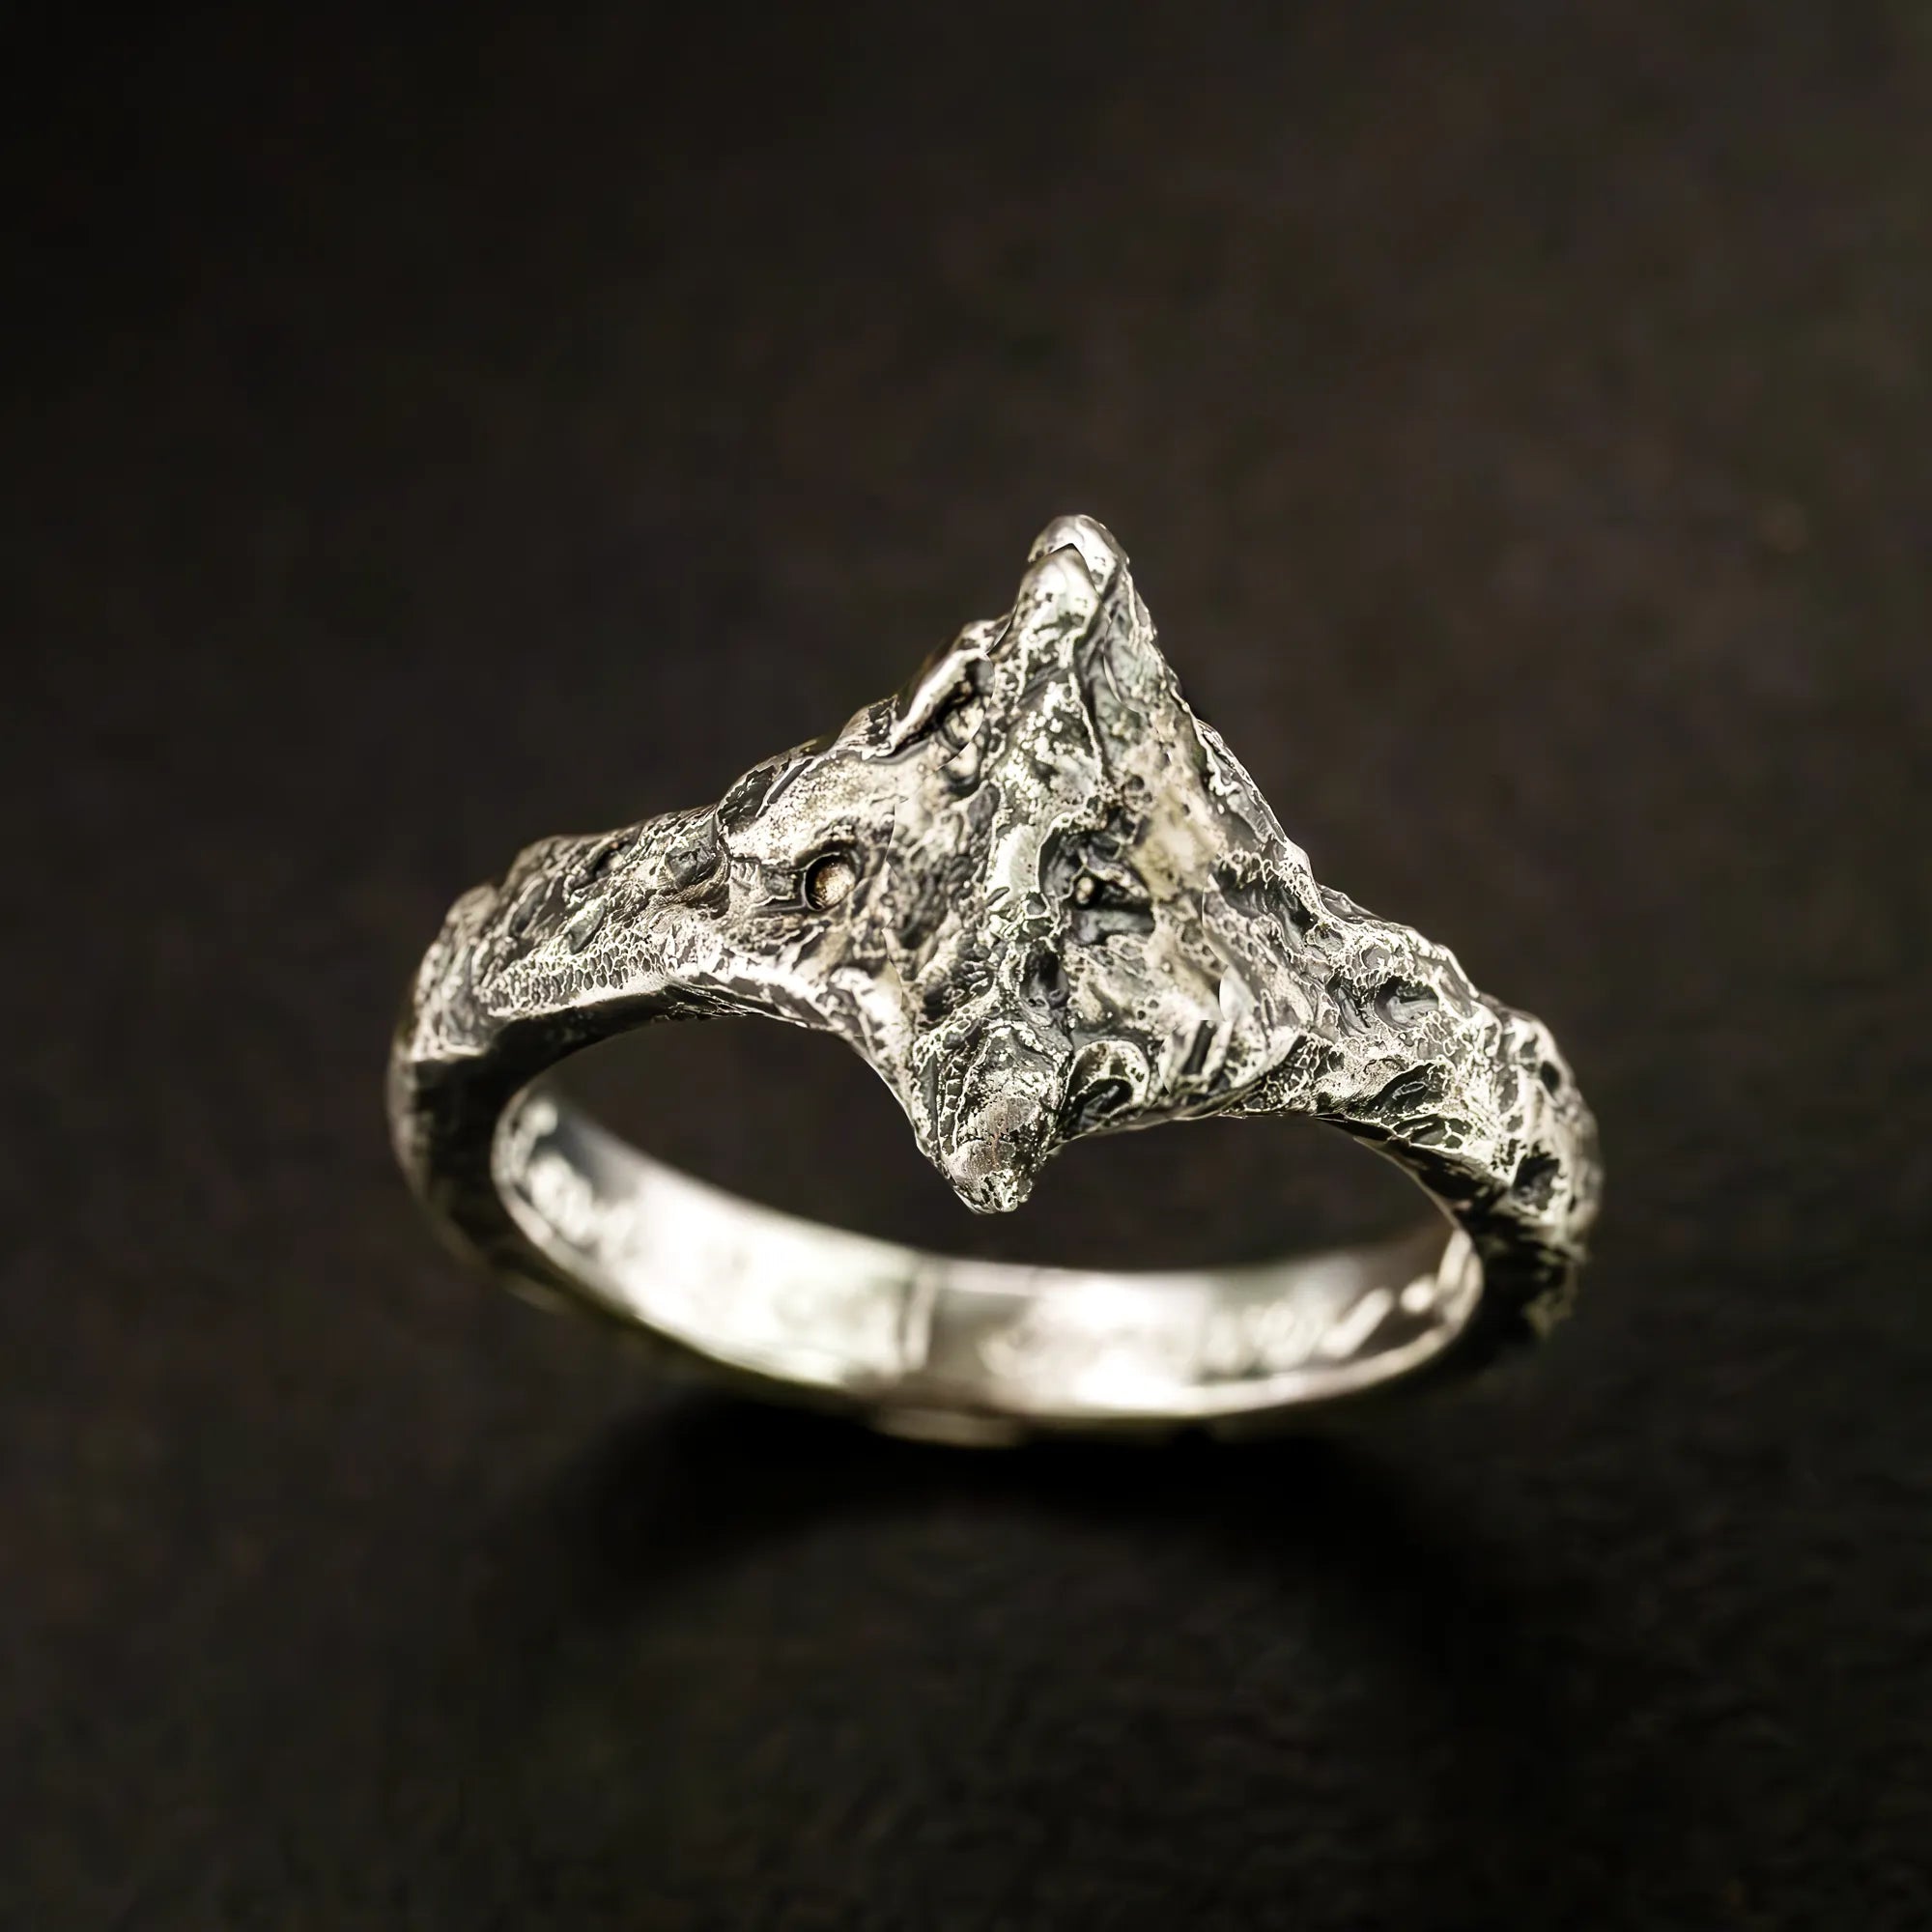 A brutalist, textured ring inspired by dark souls. The top is pointed like a v on both ends and features a darkened finish. Made entirely from argentium sterling silver.